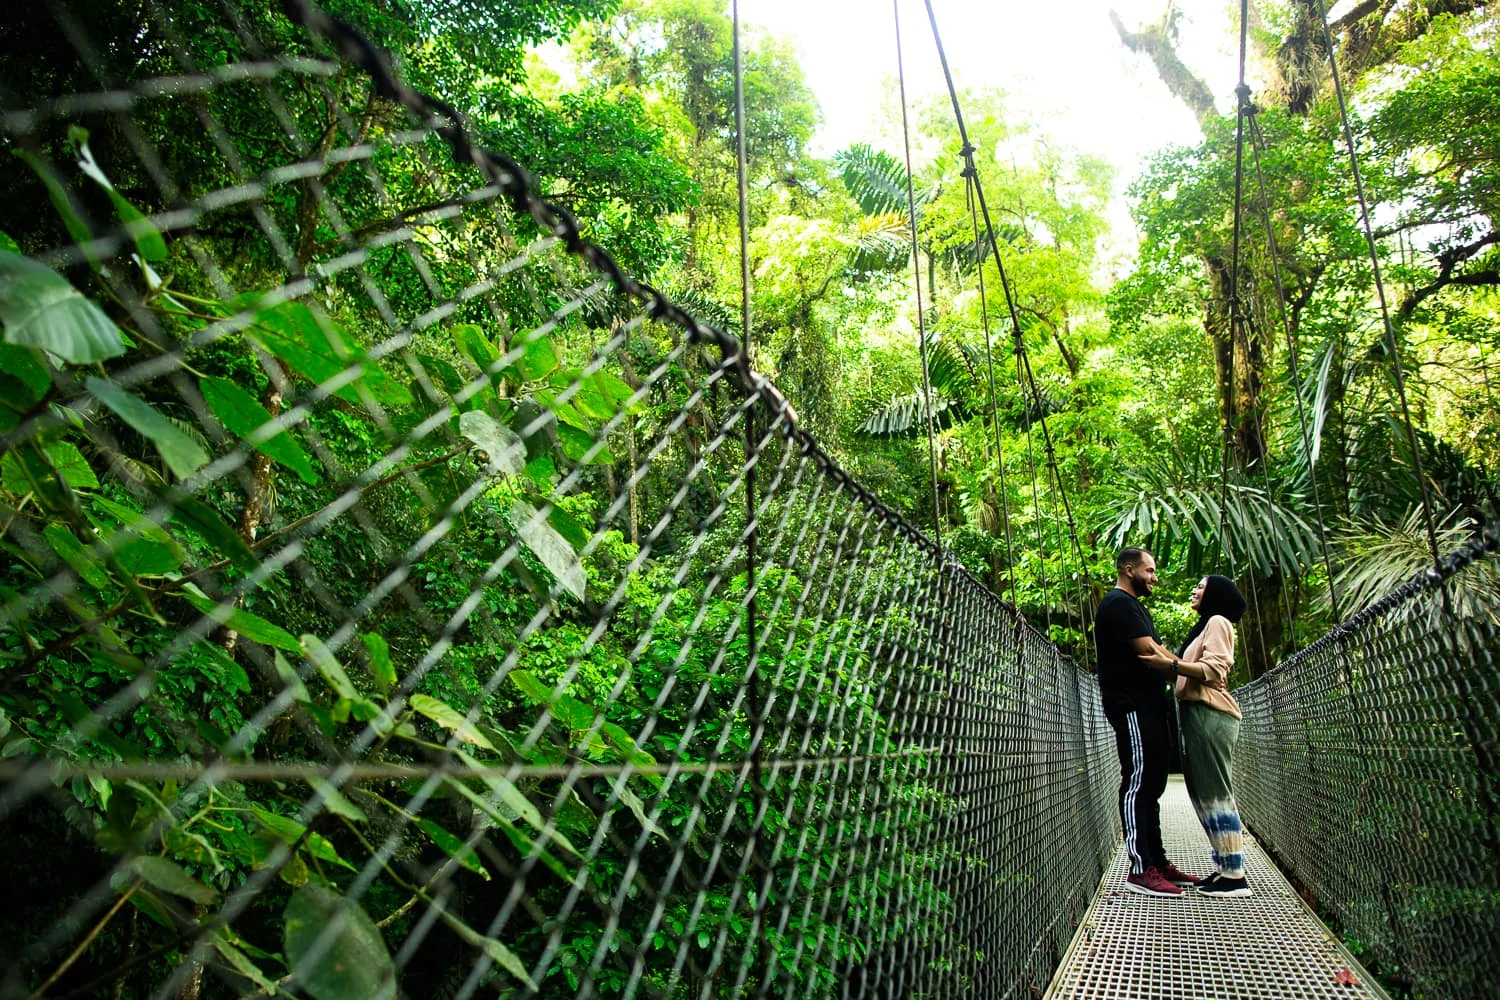 A woman wearing hijab embraces her husband on a swing bridge in the jungles of Costa Rica.